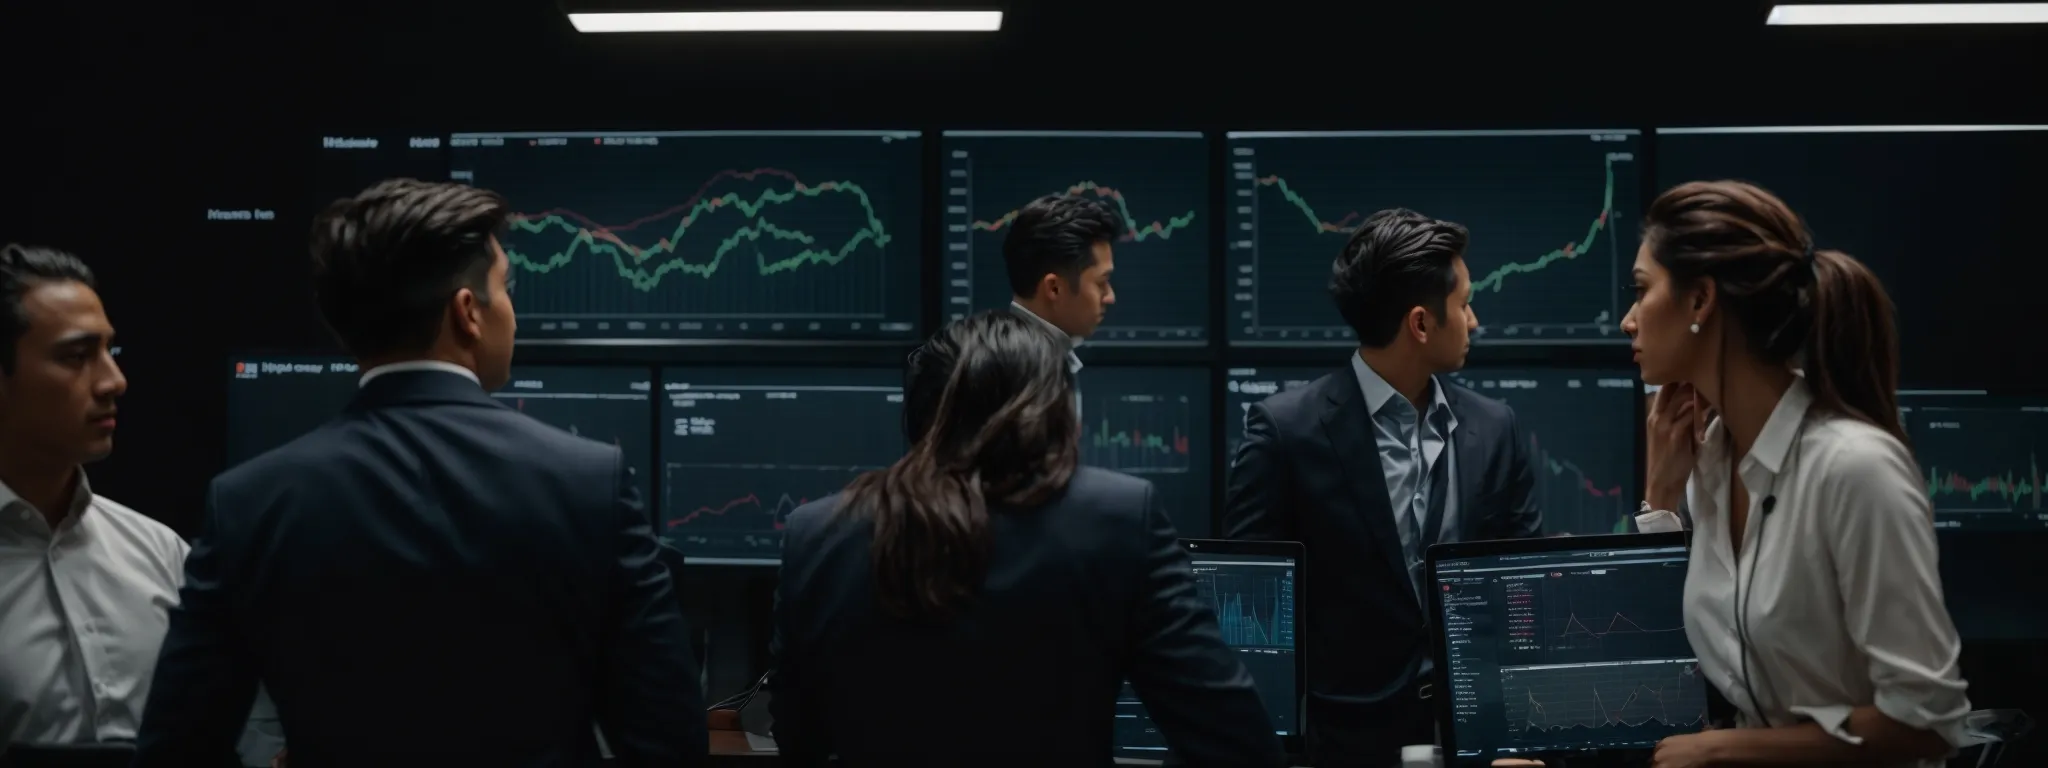 a businessperson points to a screen displaying graphs and analytics while discussing strategies with a team.